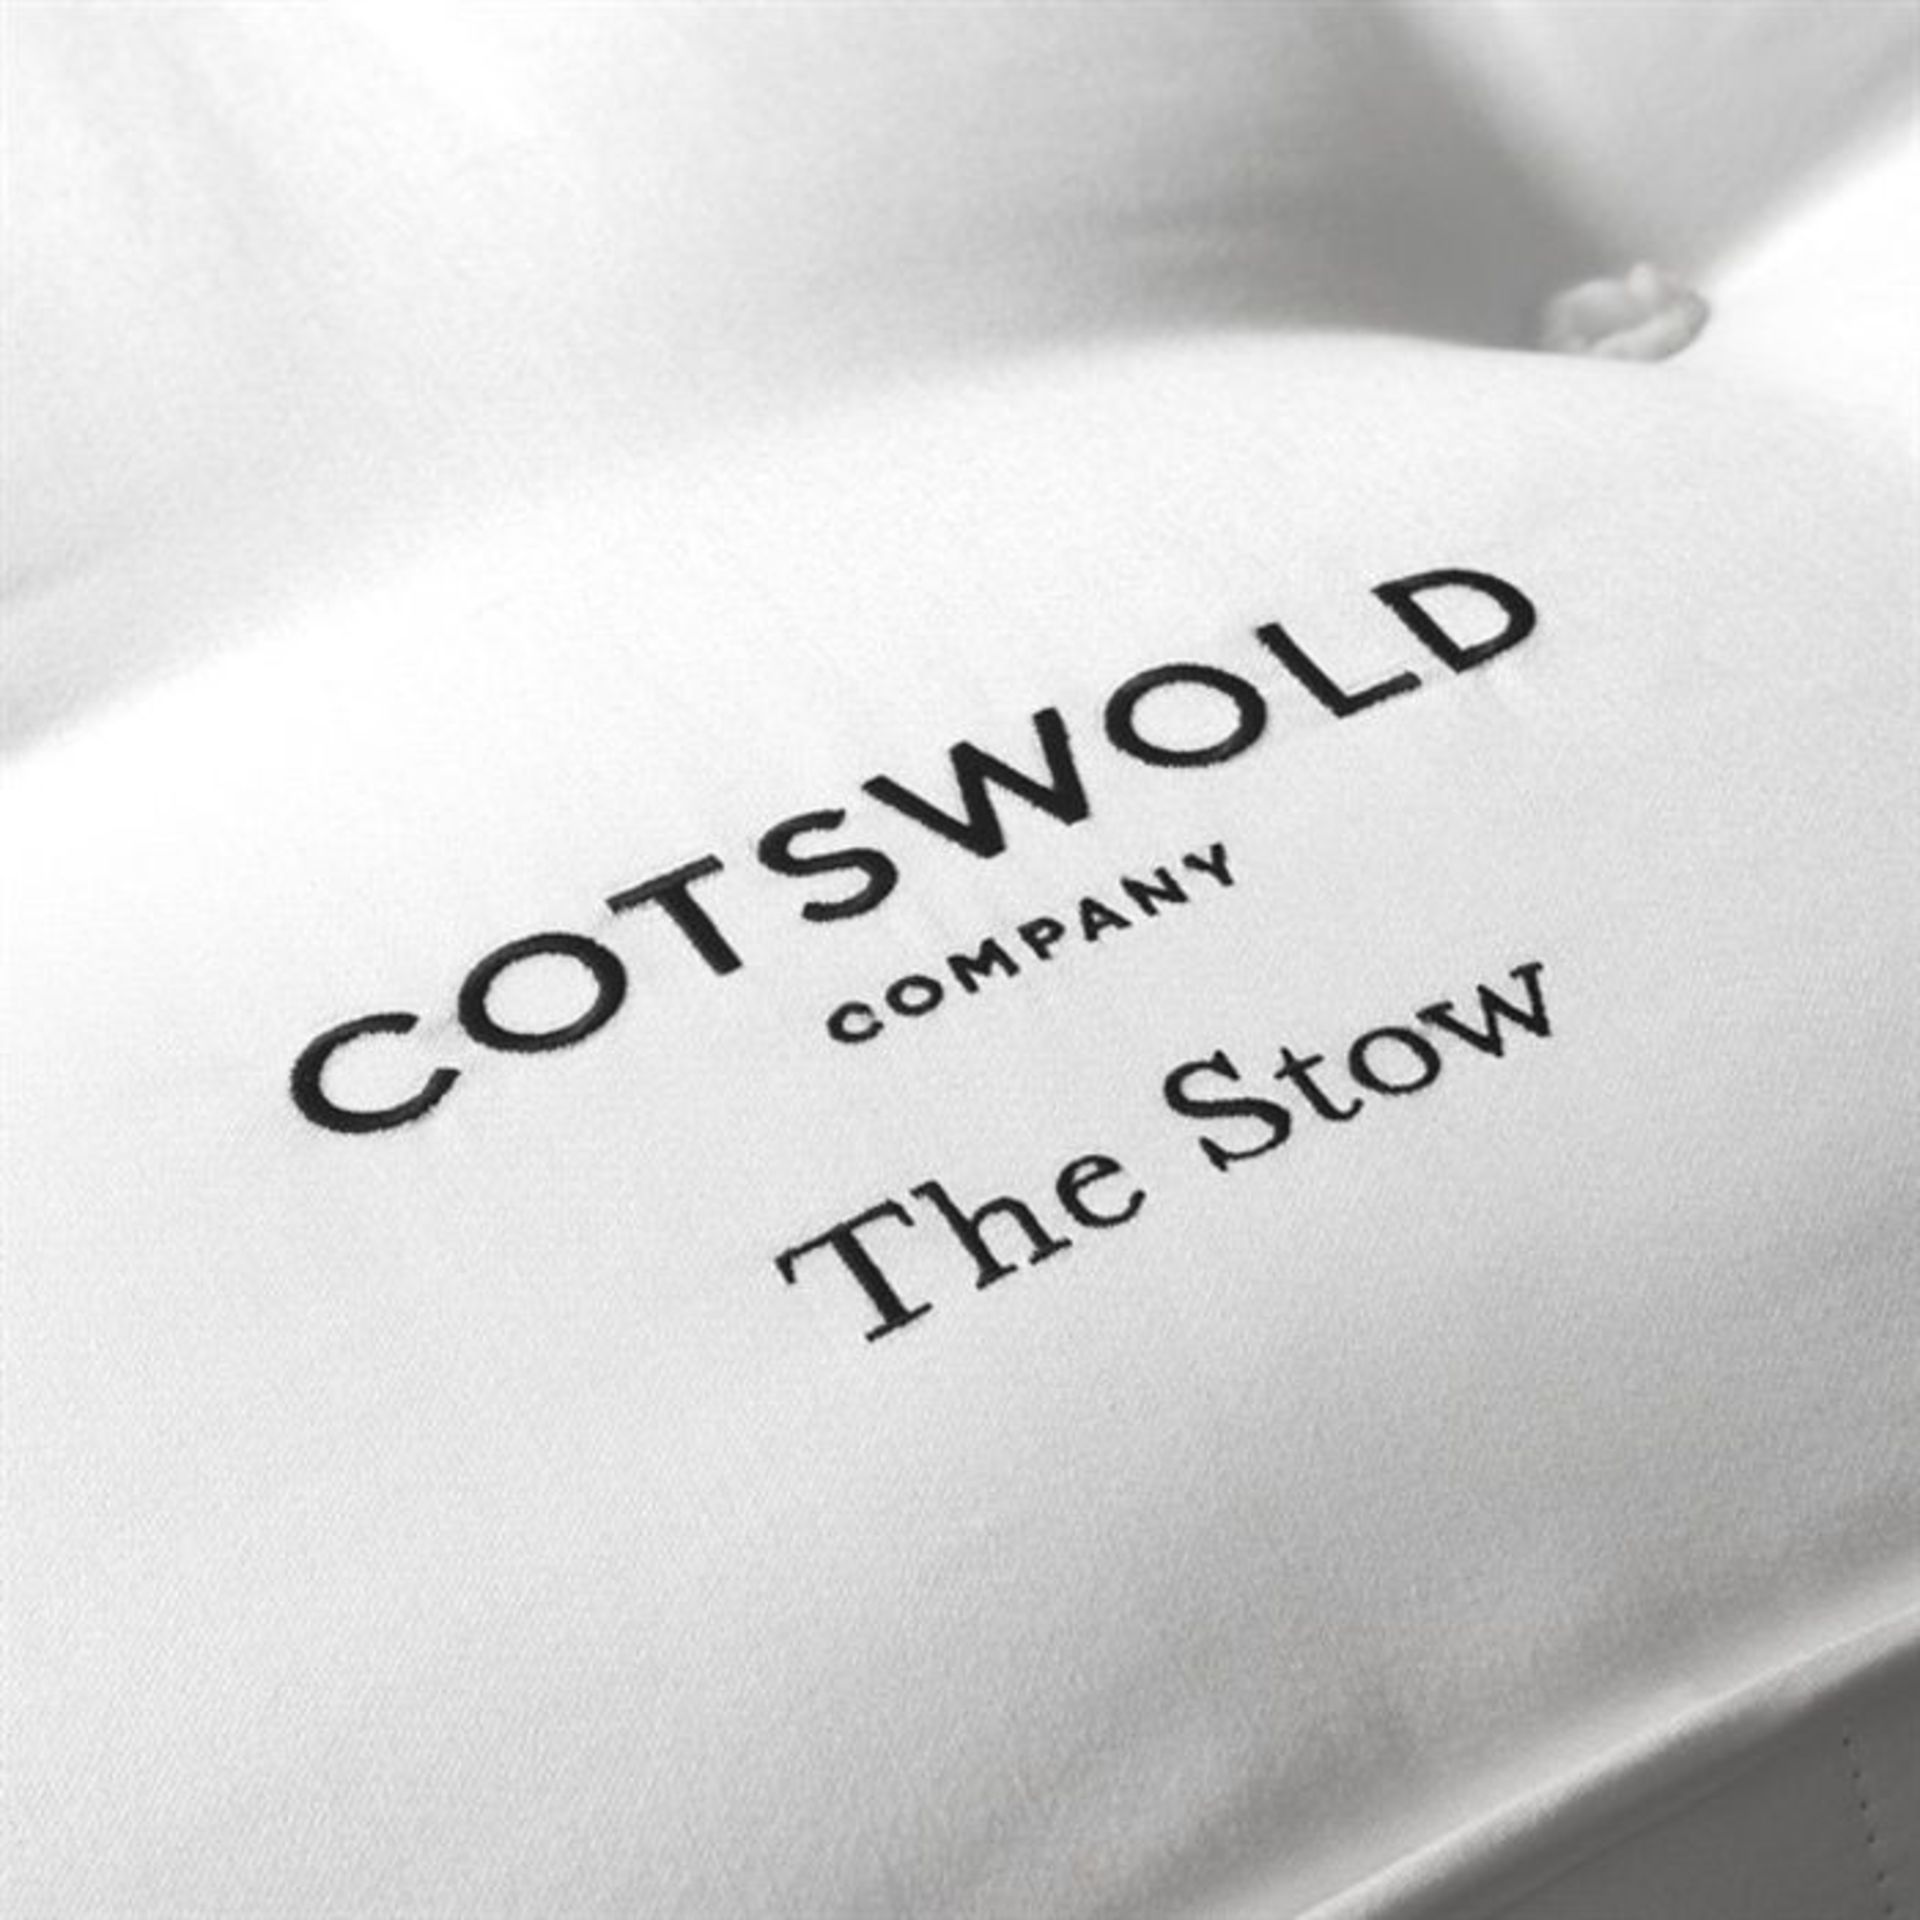 Cotswold Company The Stow Super King Mattress 1000 Pocket Spring Medium Tension RRP 995.00 Grade BC - Image 3 of 4